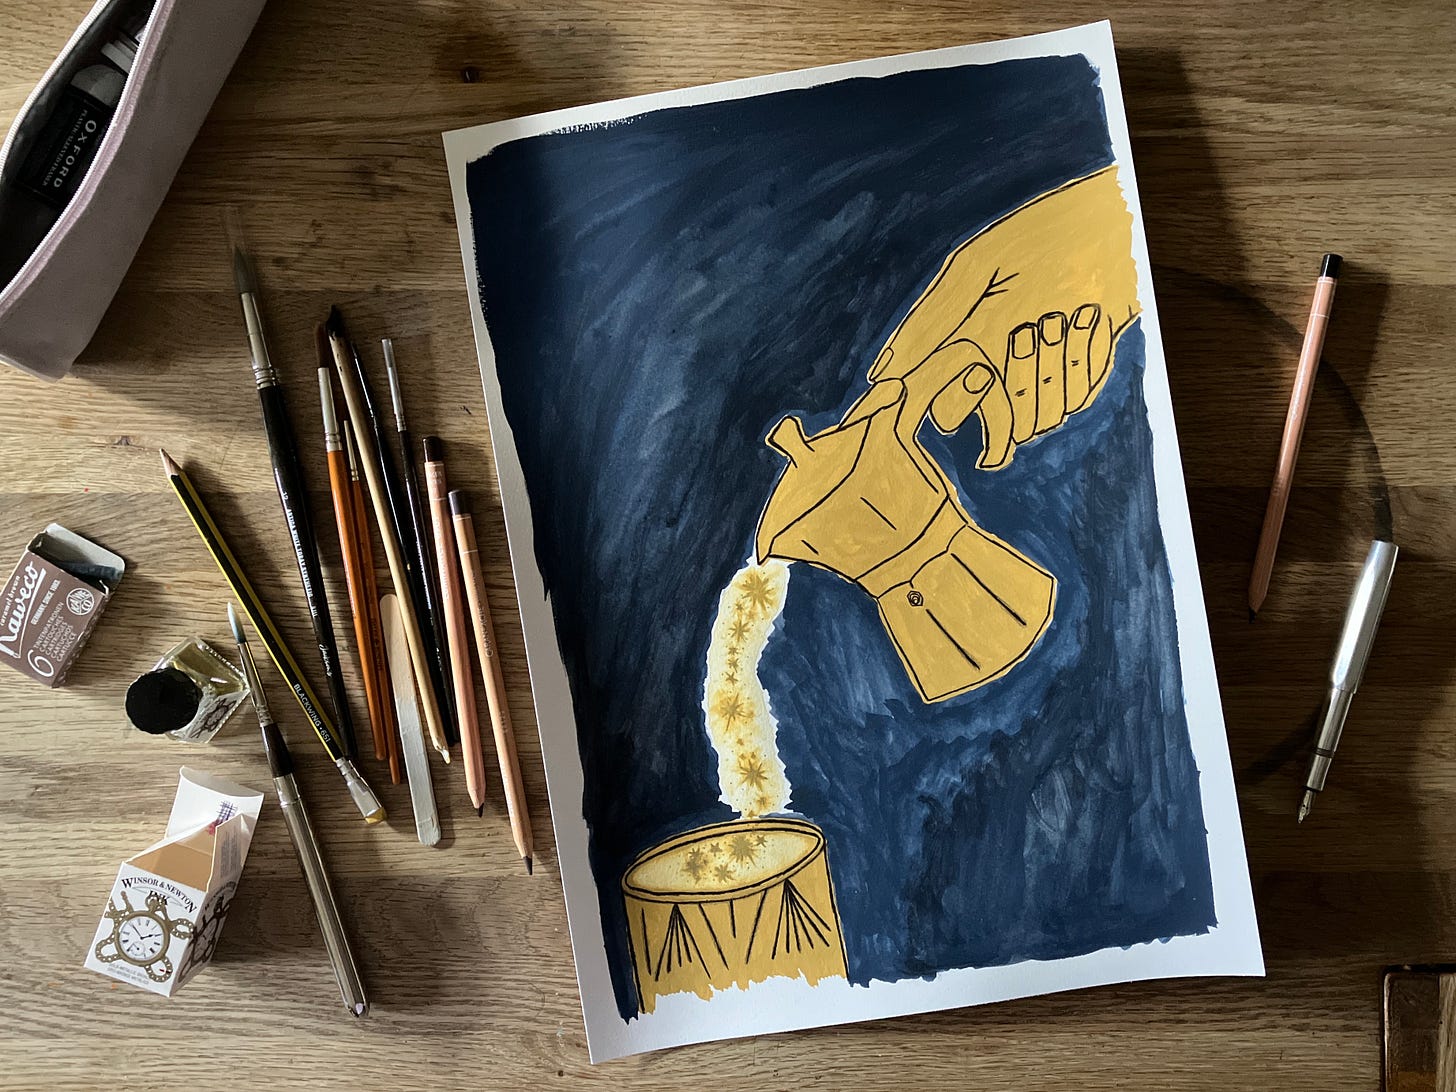 Painting of coffee pot pouring stars sits atop a desk surrounded by art materials